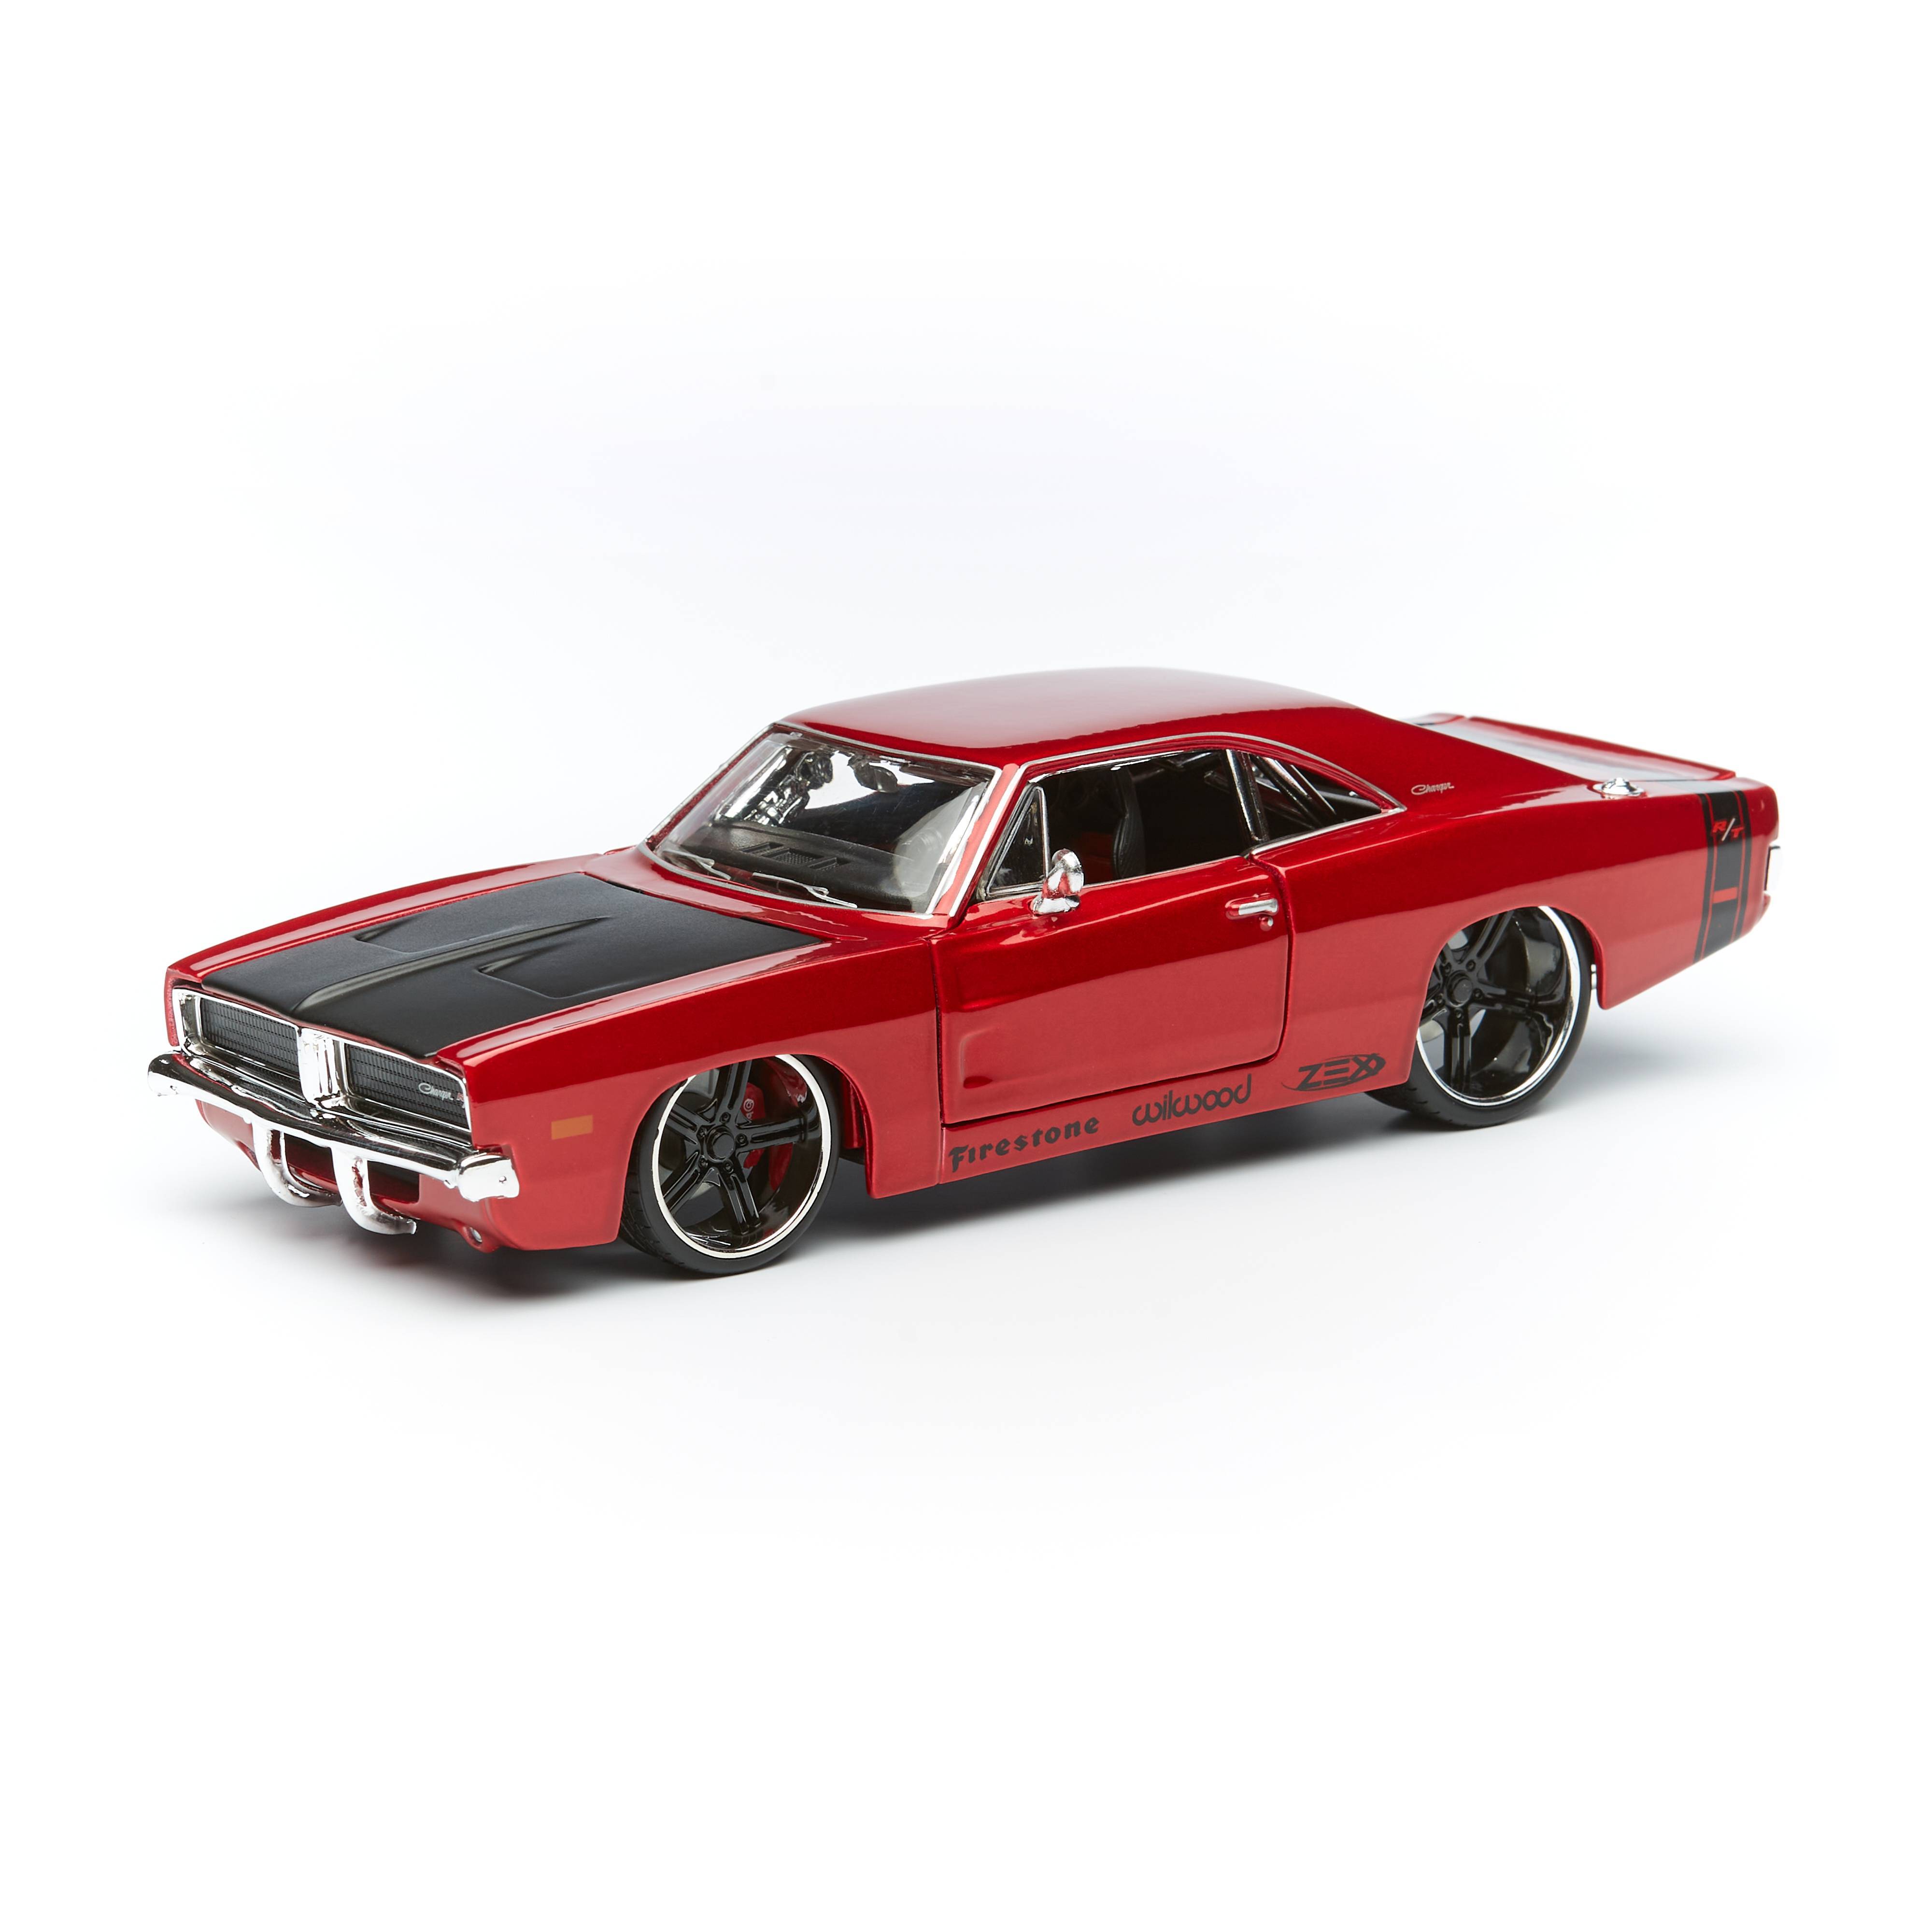 Maisto Машинка 1:25 Design Classic Muscle - 1969 Dodge Charger R/T, красная 32537 машинка welly 2016 dodge charger r t 1 38 43742